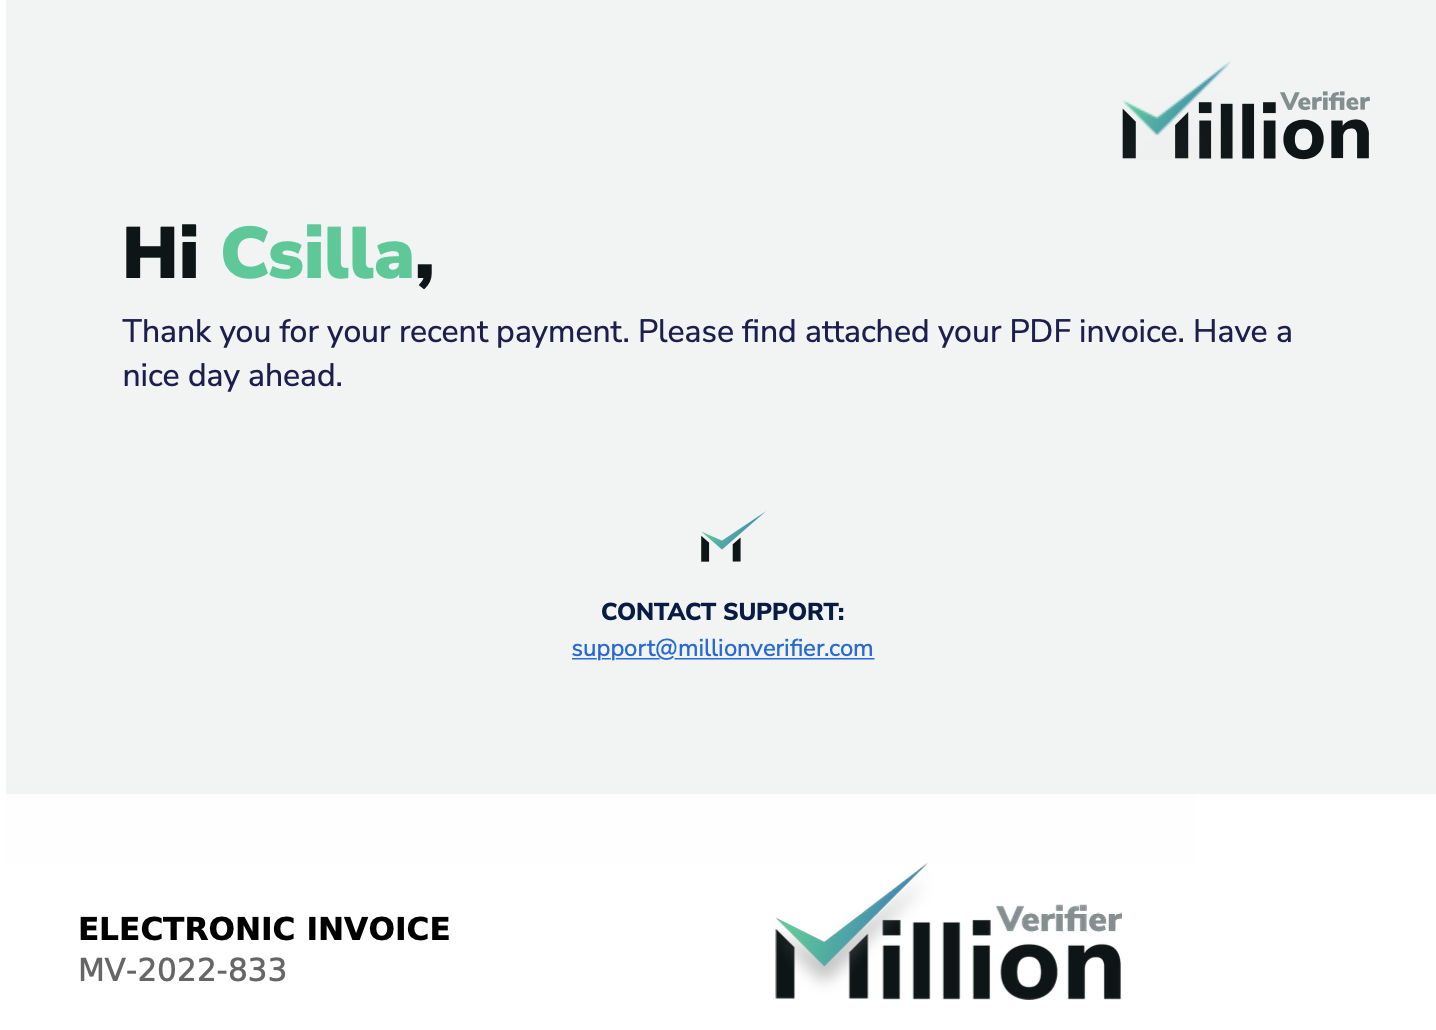 Email Invoice from MillionVerifier